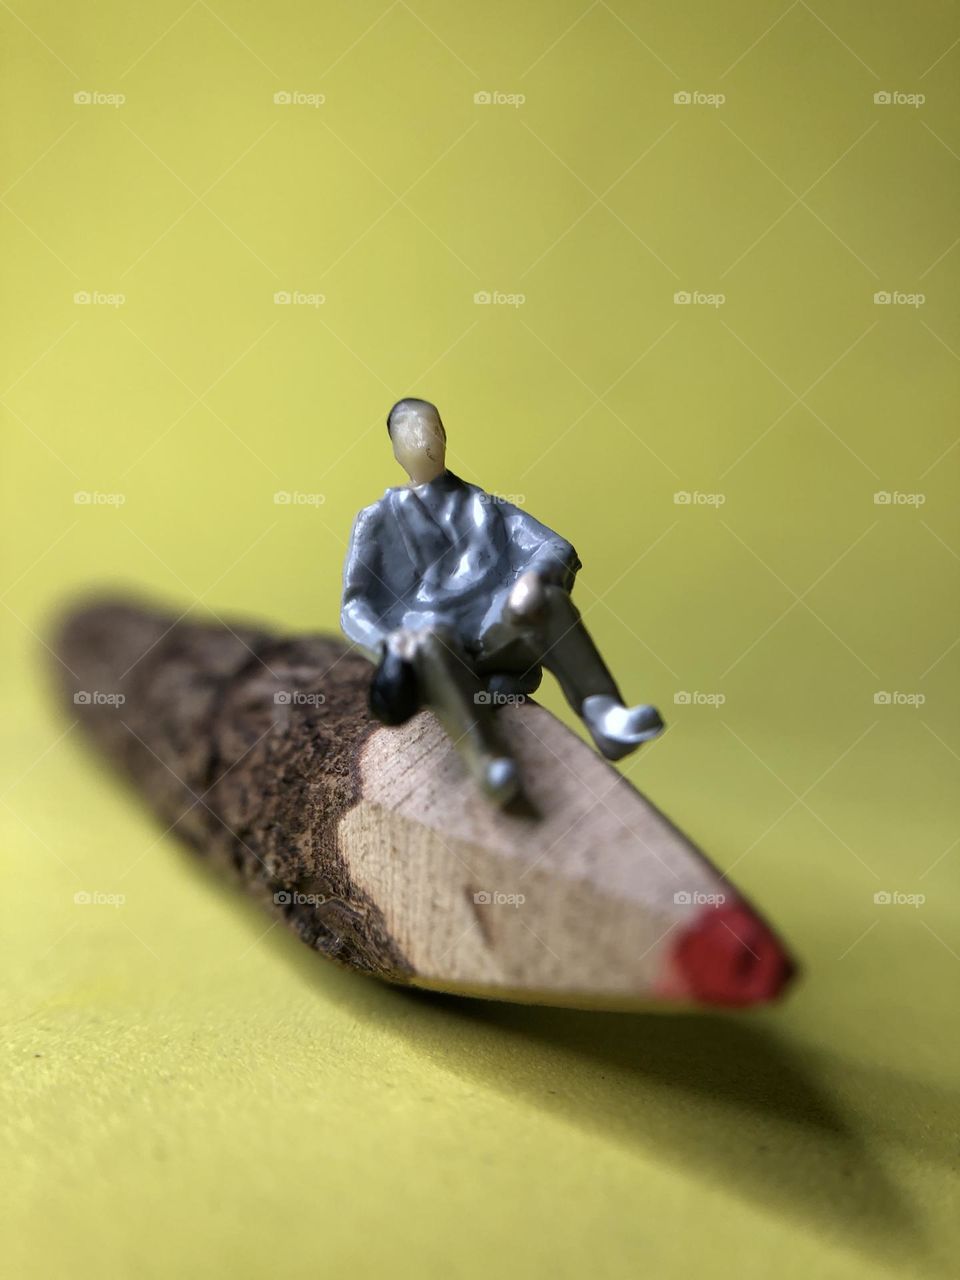 A tiny model person sits on the end of a twig pencil